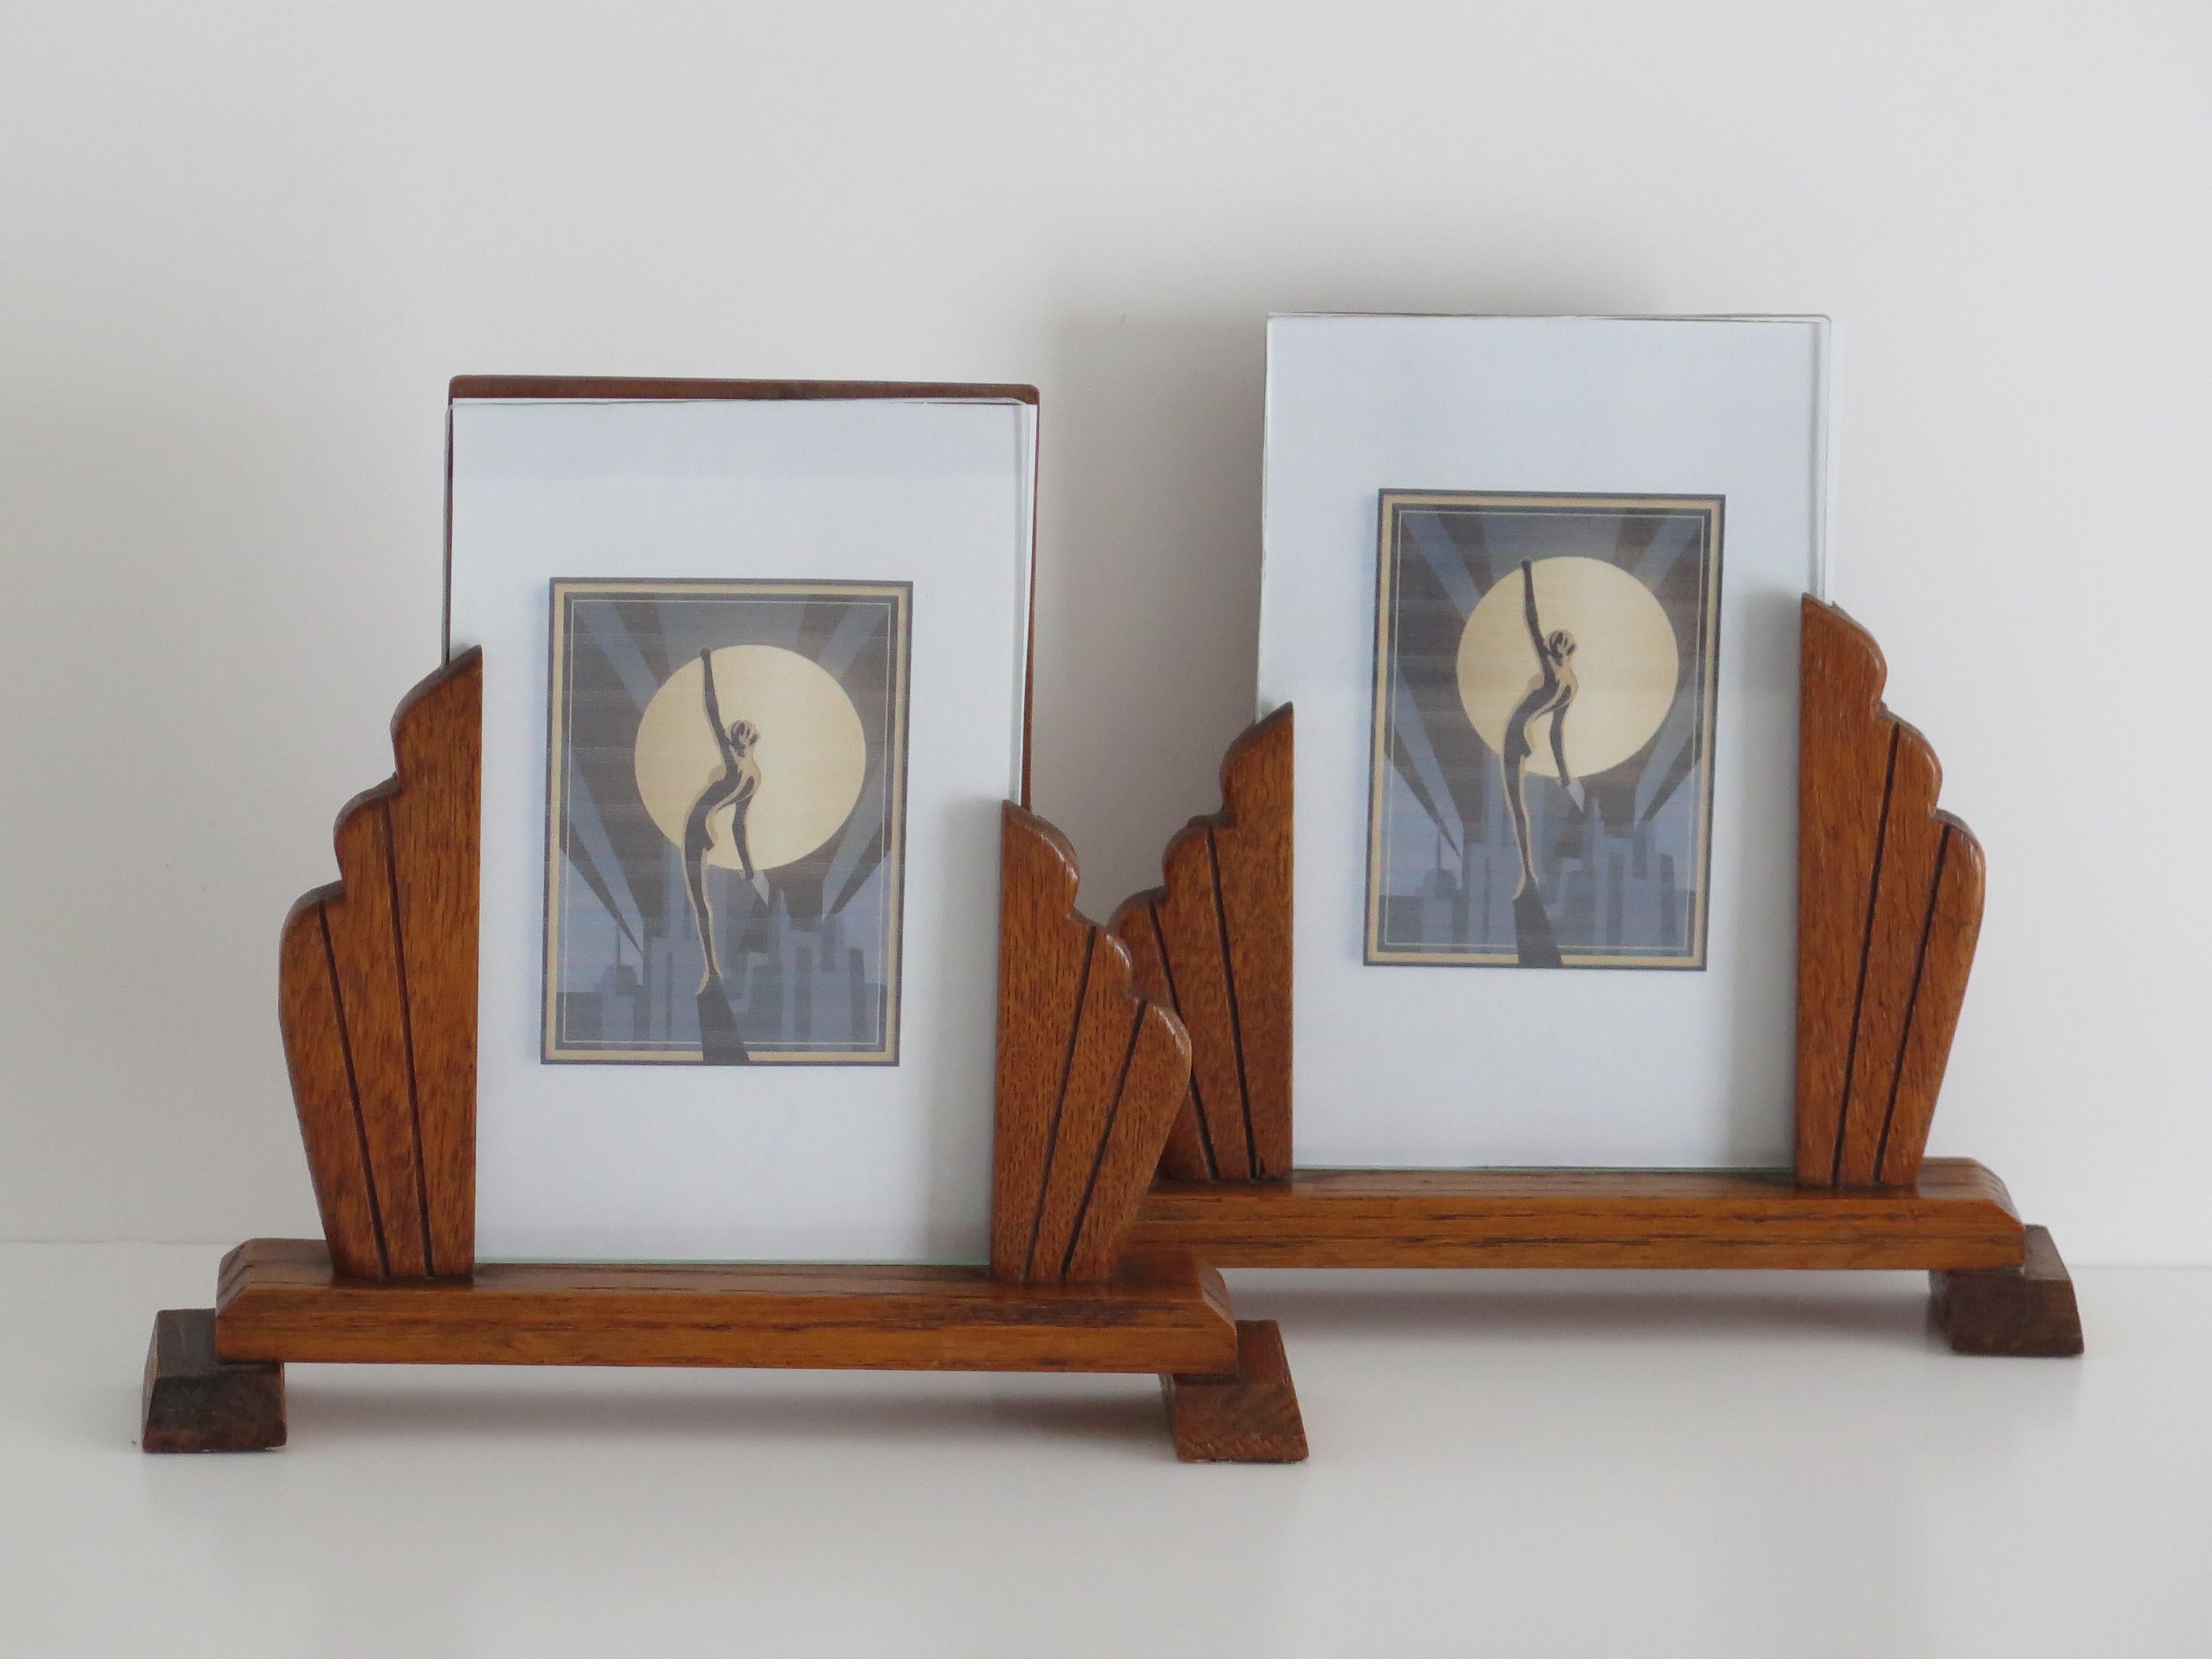 This is a beautiful PAIR of photo frames from the Art Deco period, handmade from oak having a fan design and with glass inserts, which we date to circa 1930.

Finding a genuine pair is rare!

Both pieces have been very well made out of oak, with